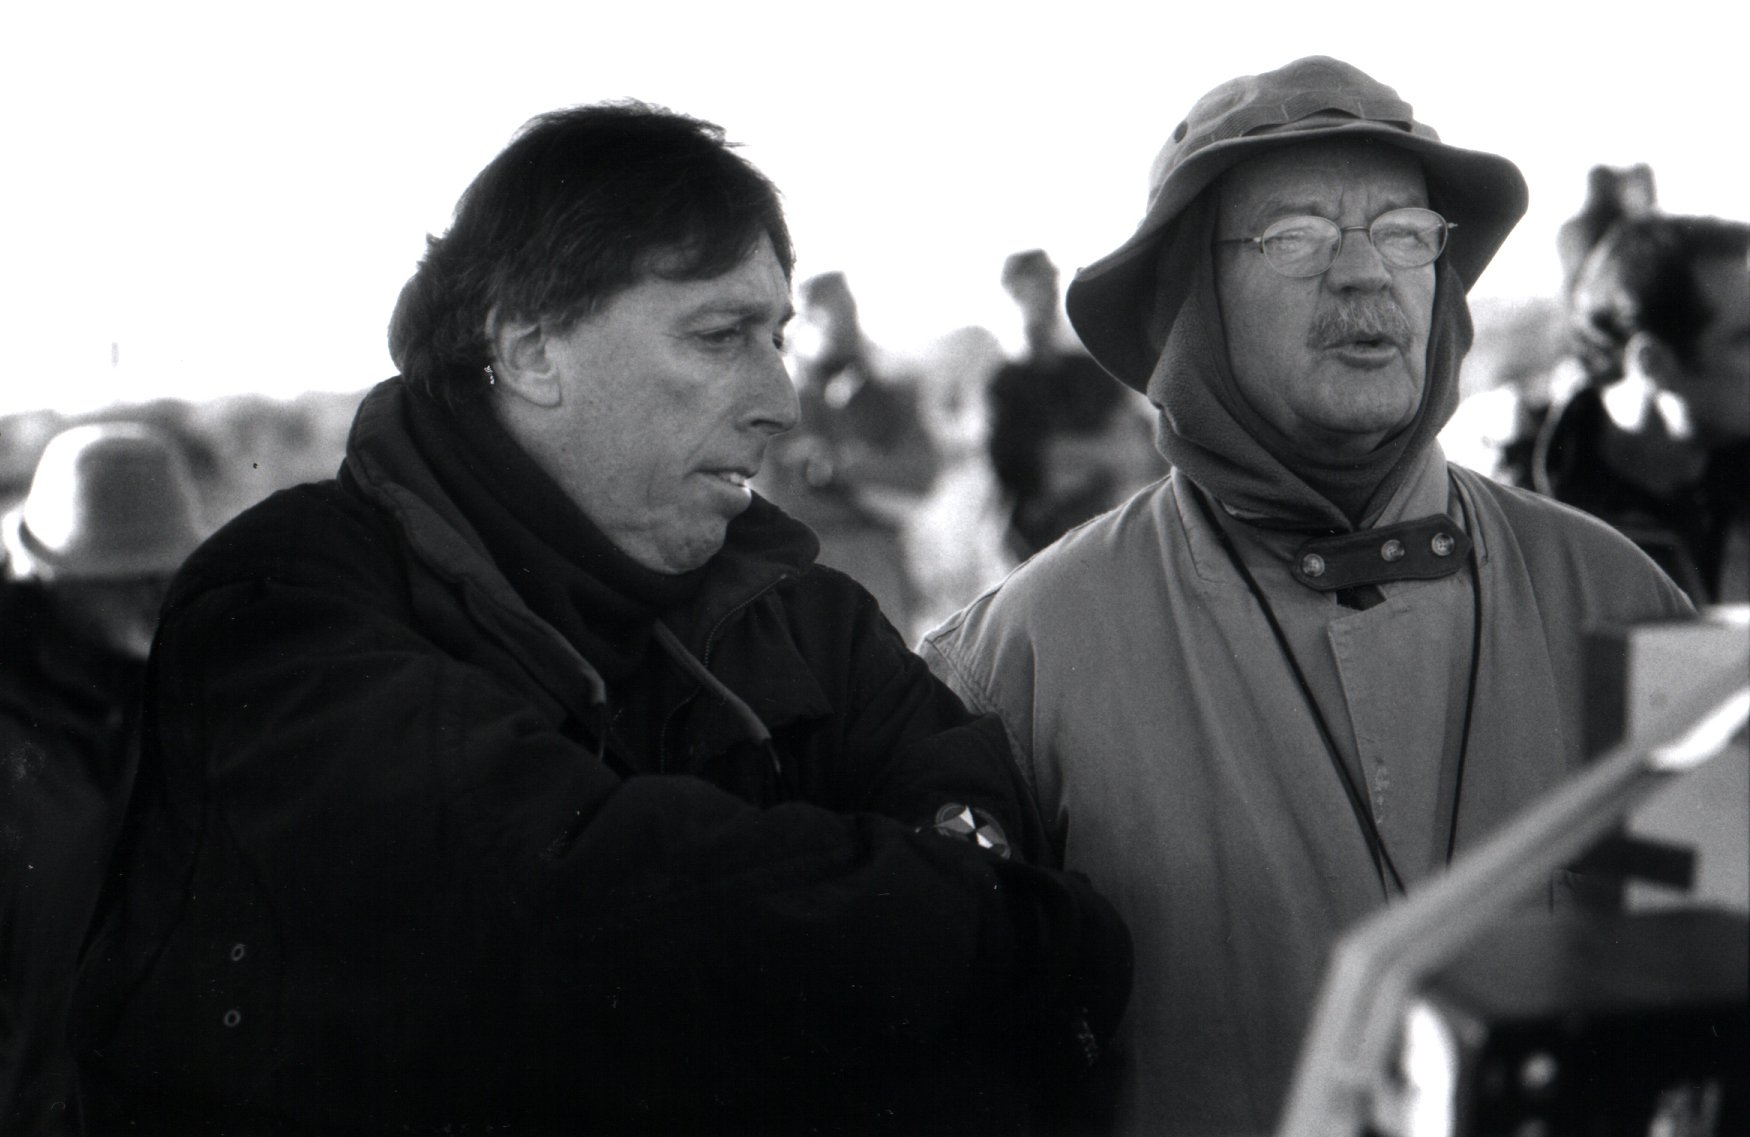 Filming the sci-fi comedy Evolution (2001) with director Ivan Reitman.